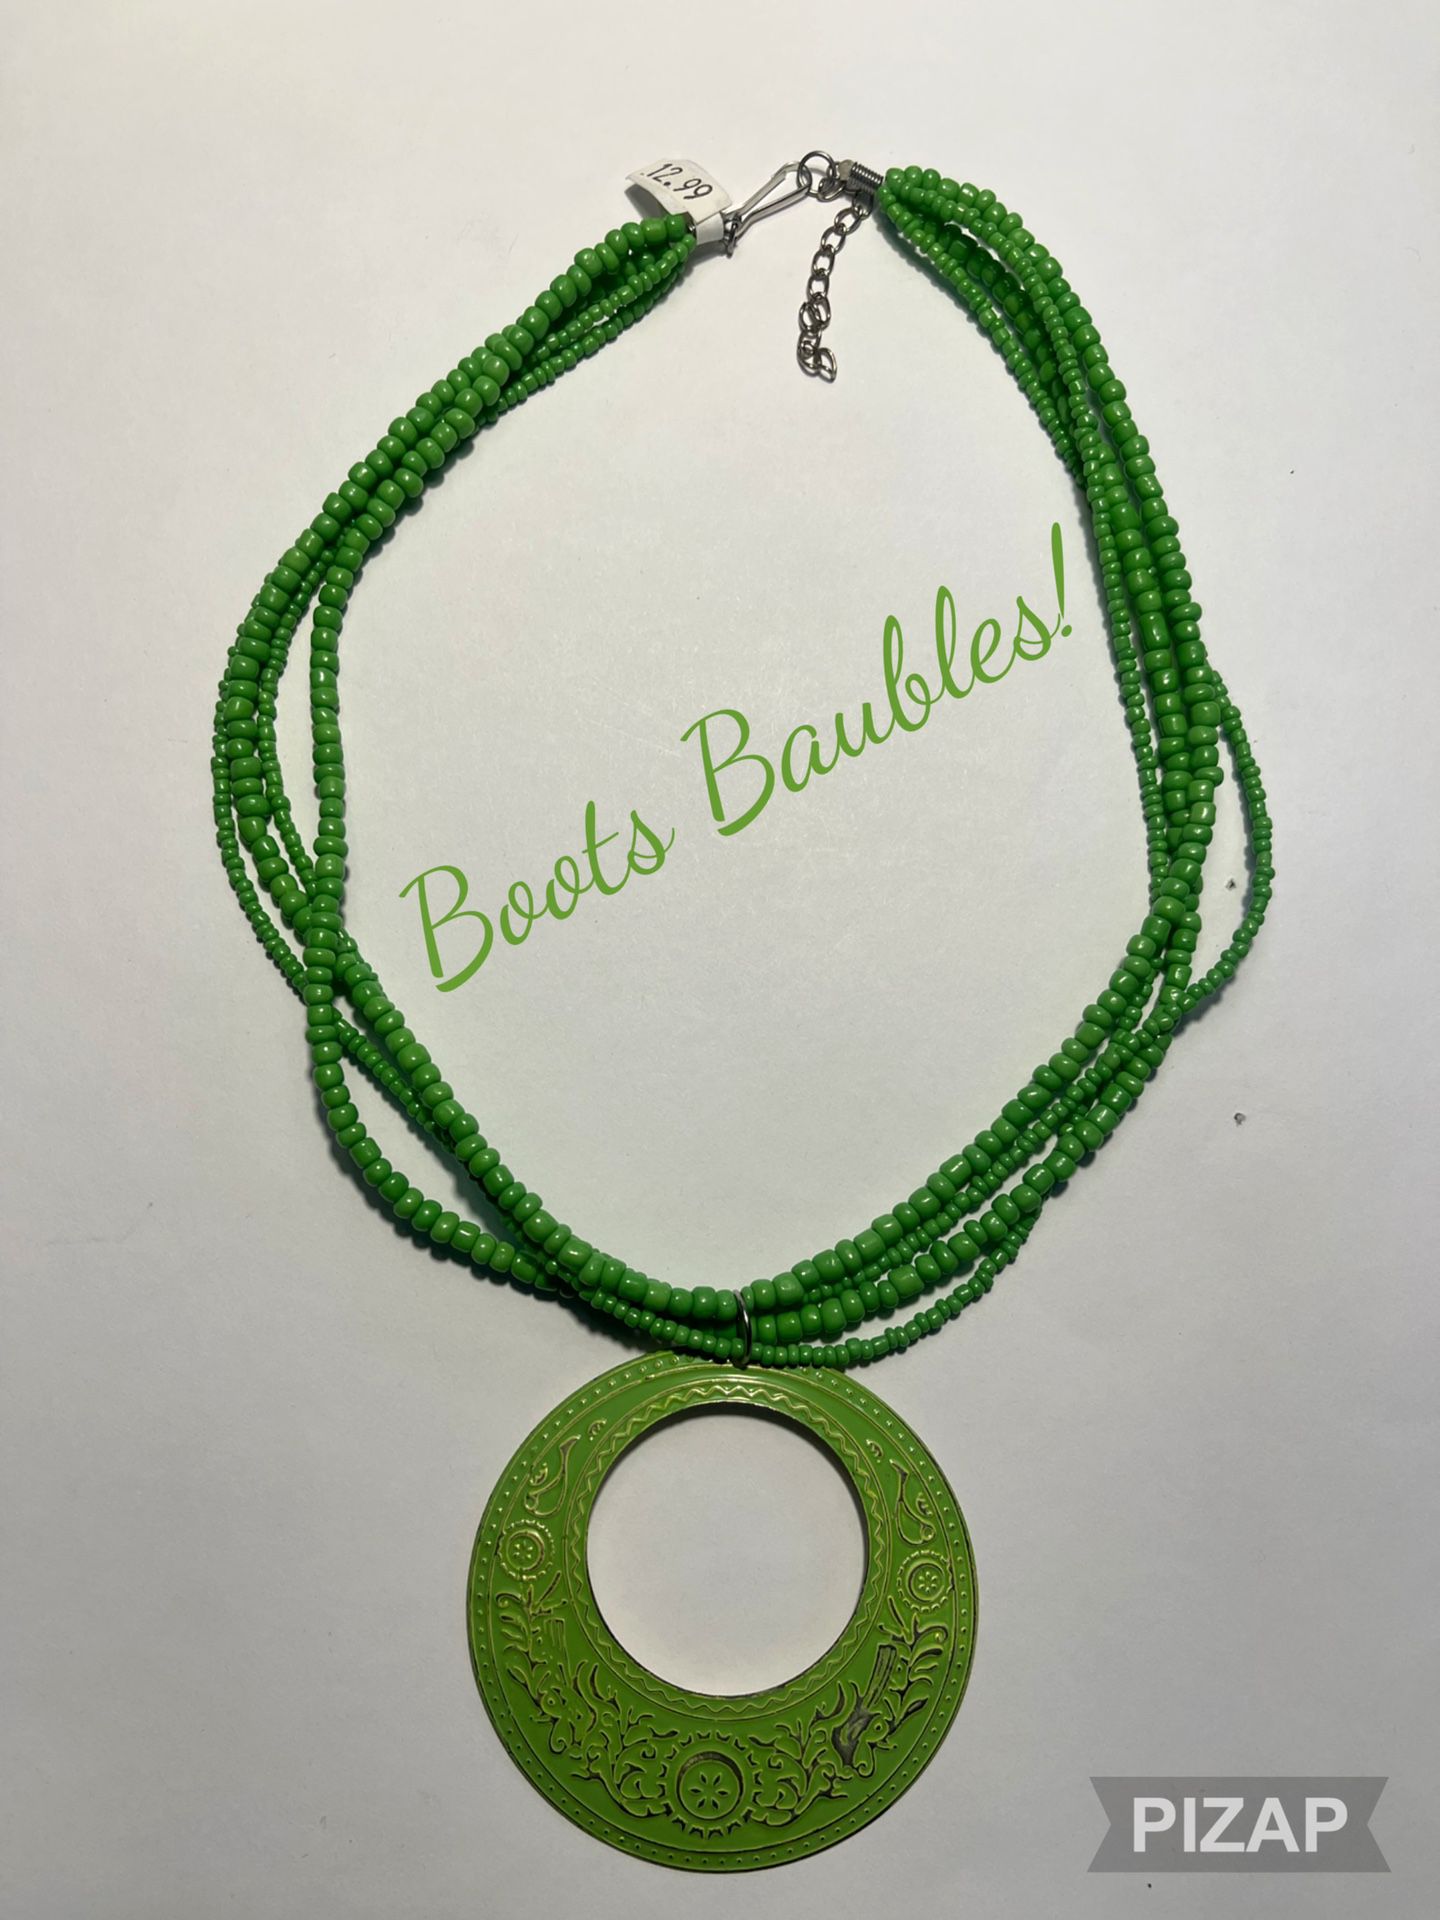 Green Seed Bead Necklace